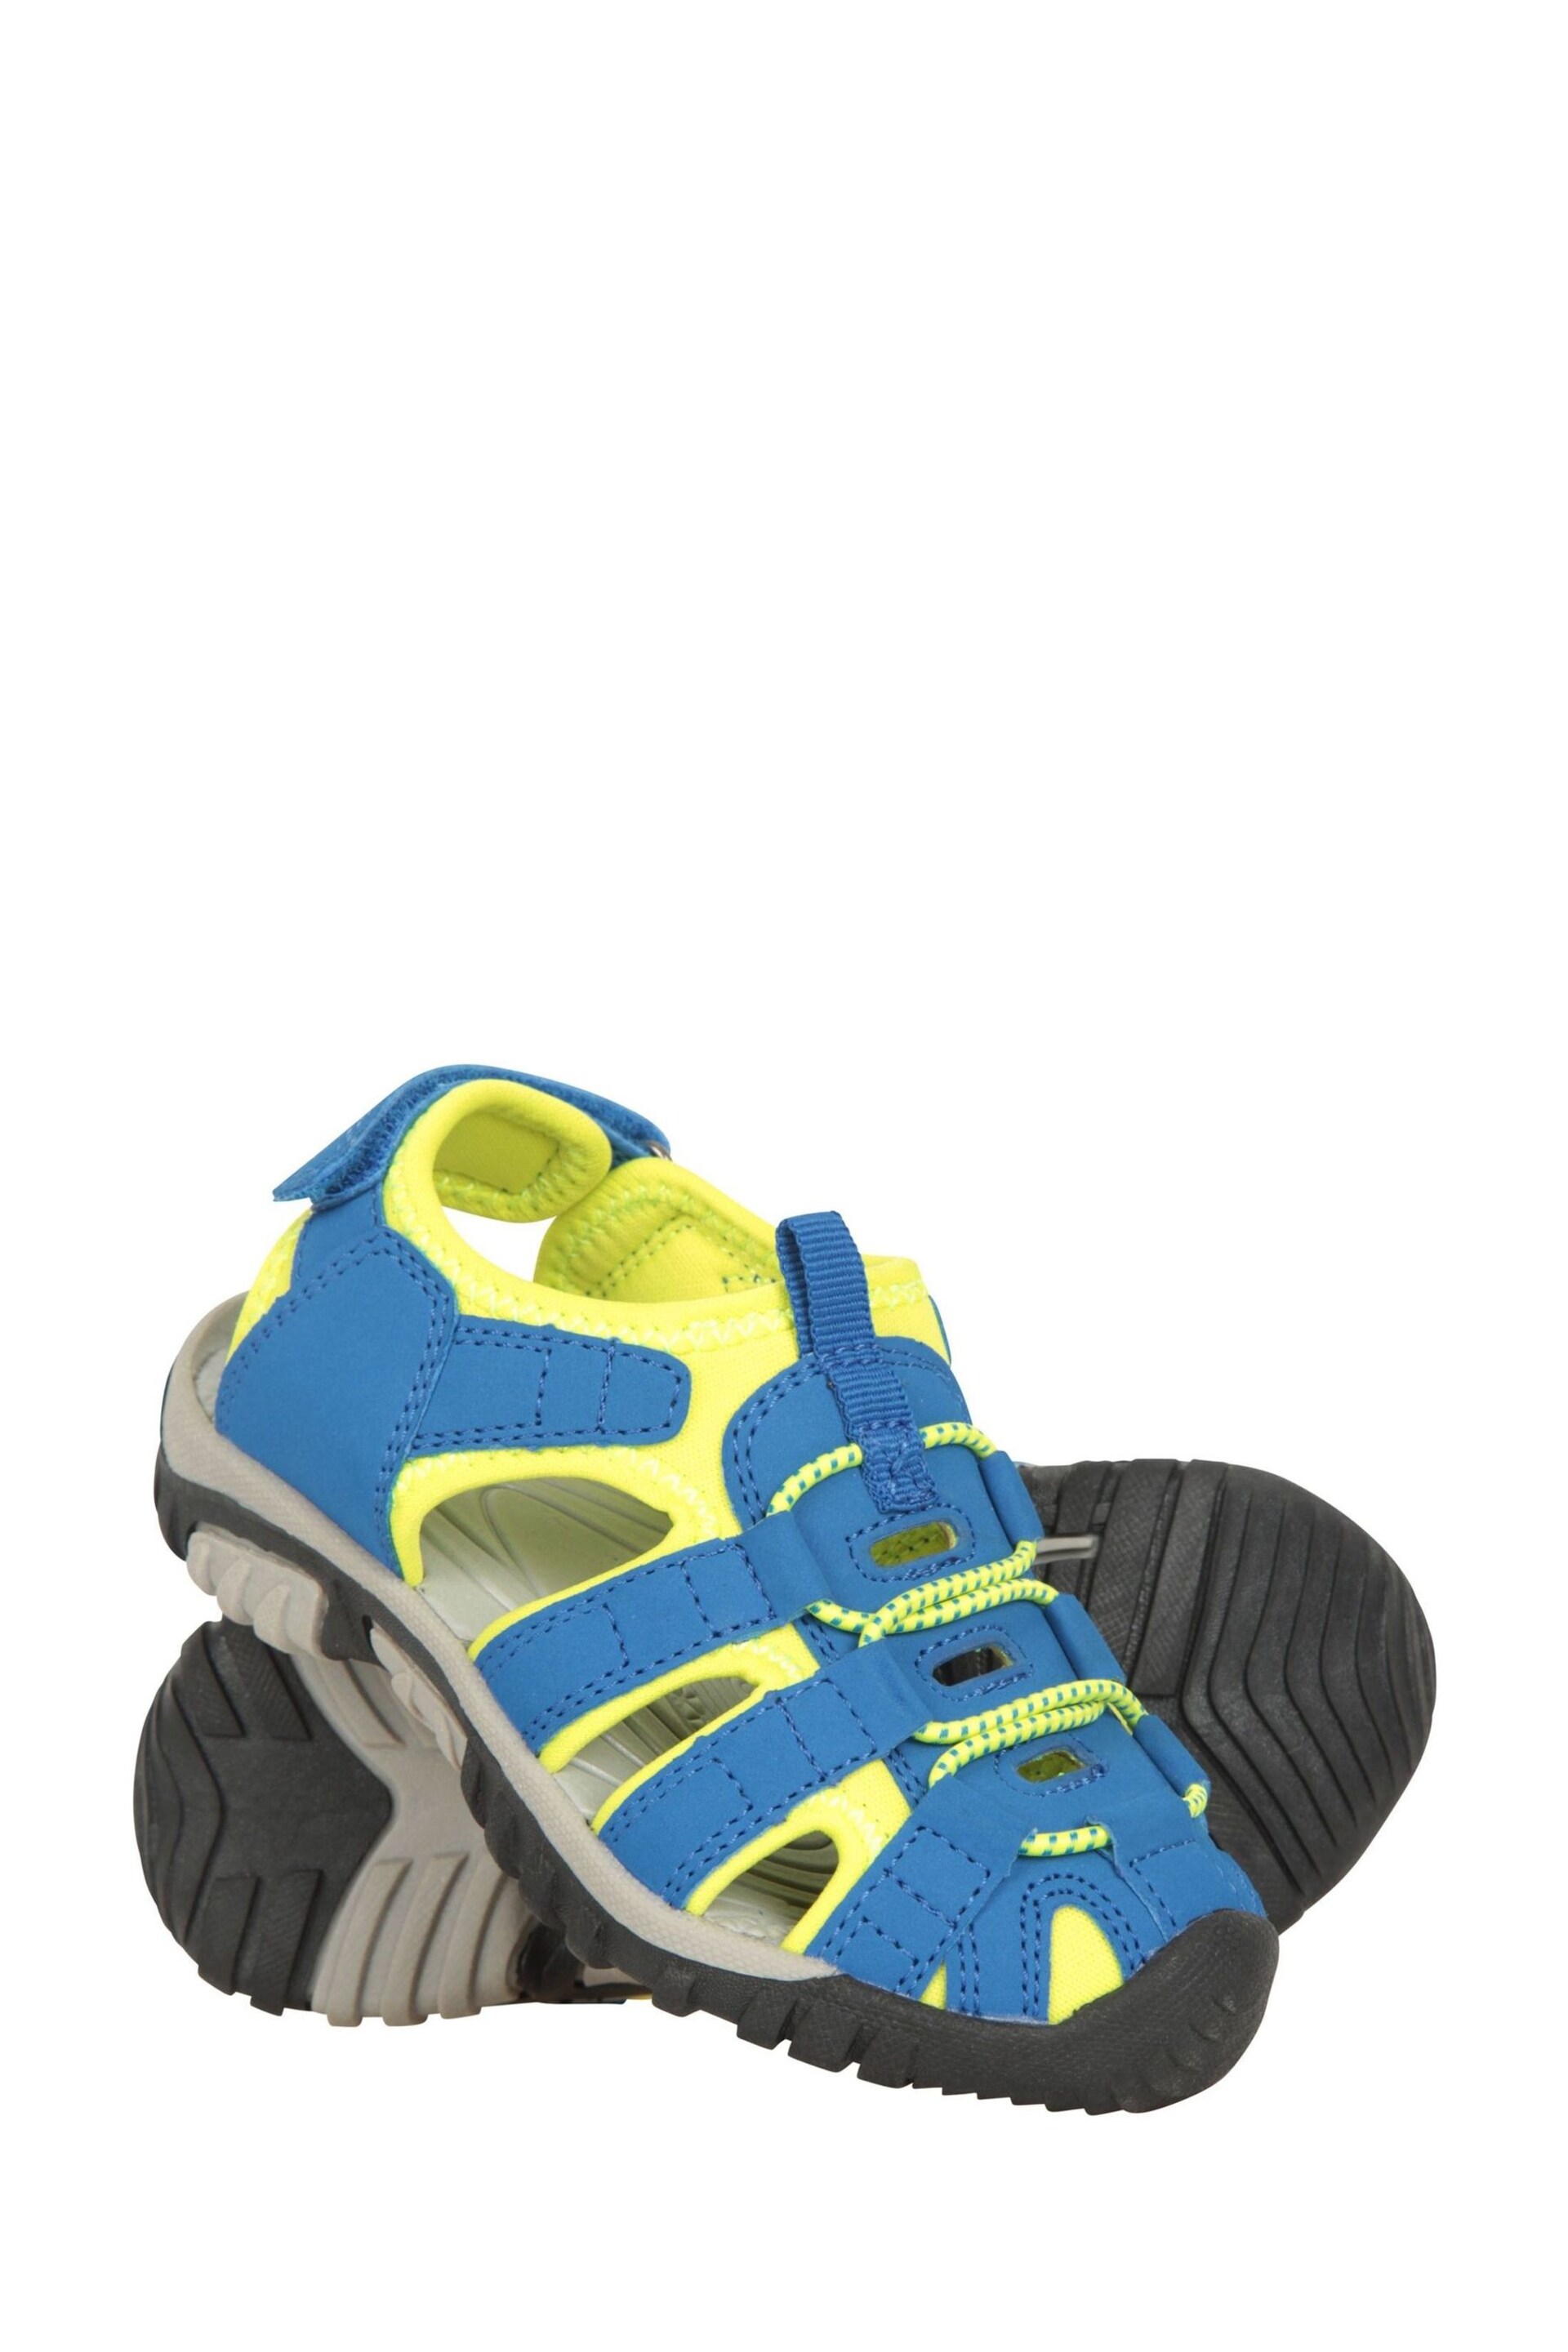 Mountain Warehouse Green Bay Toddler Sandals - Image 2 of 8